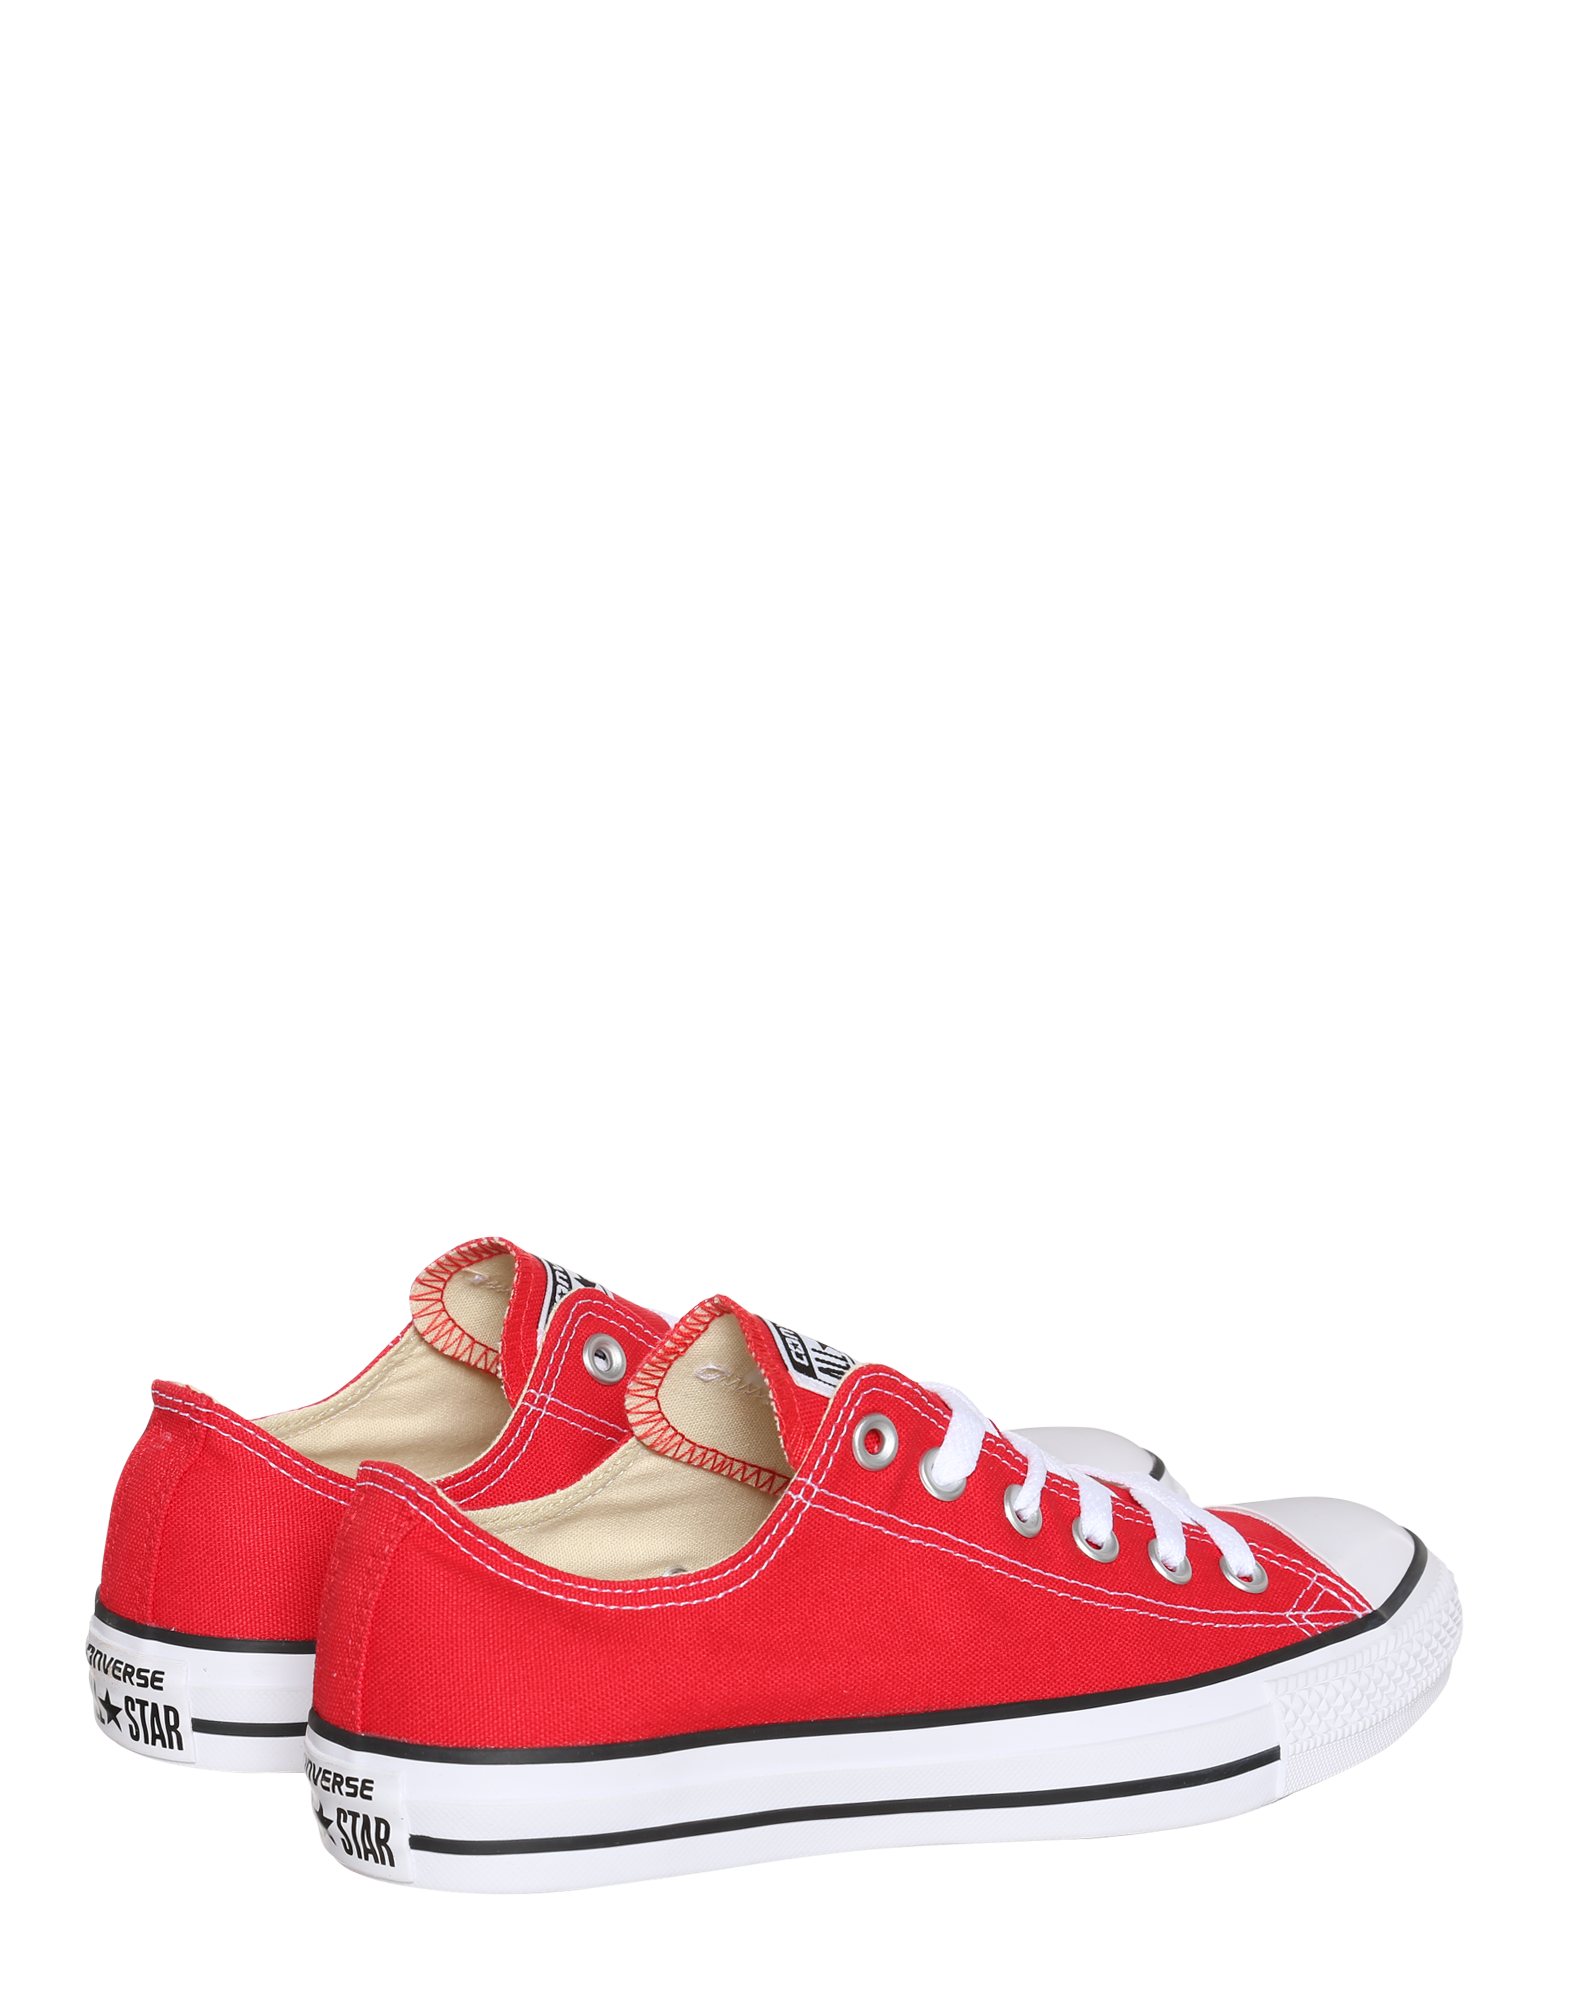 CONVERSE Sneaker Chuck Taylor AS Core in Rot 